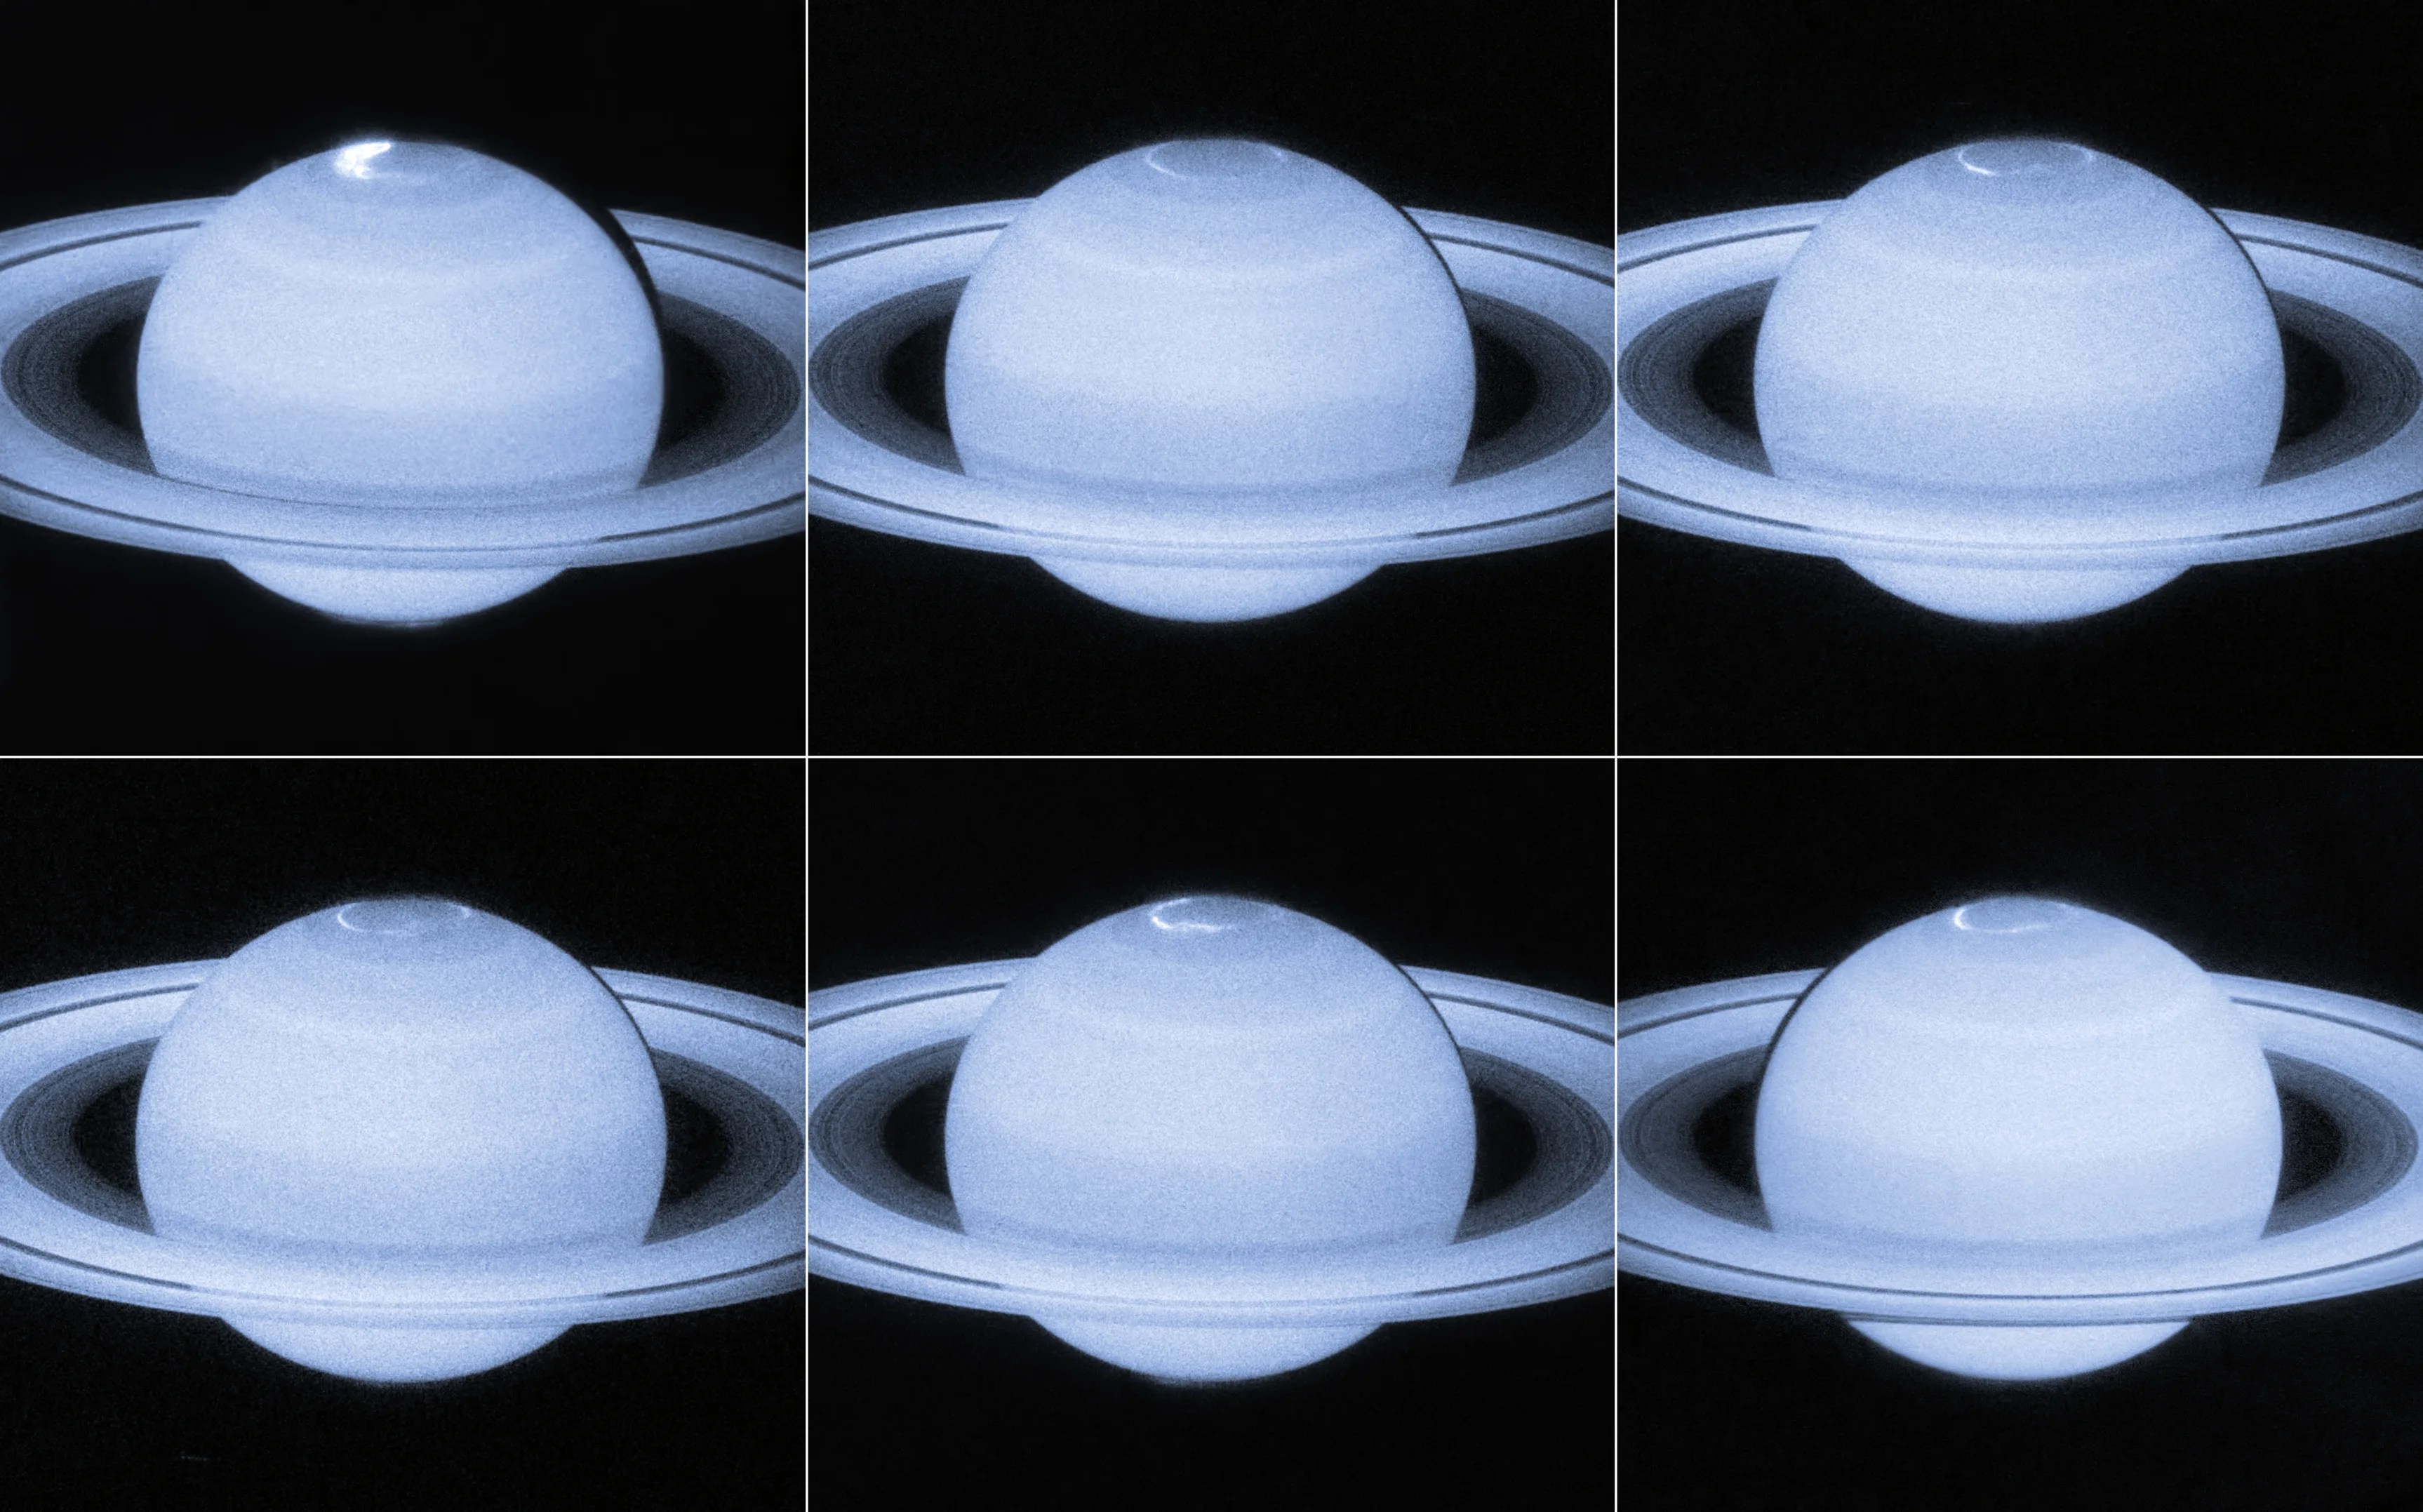 Hubble views of saturn